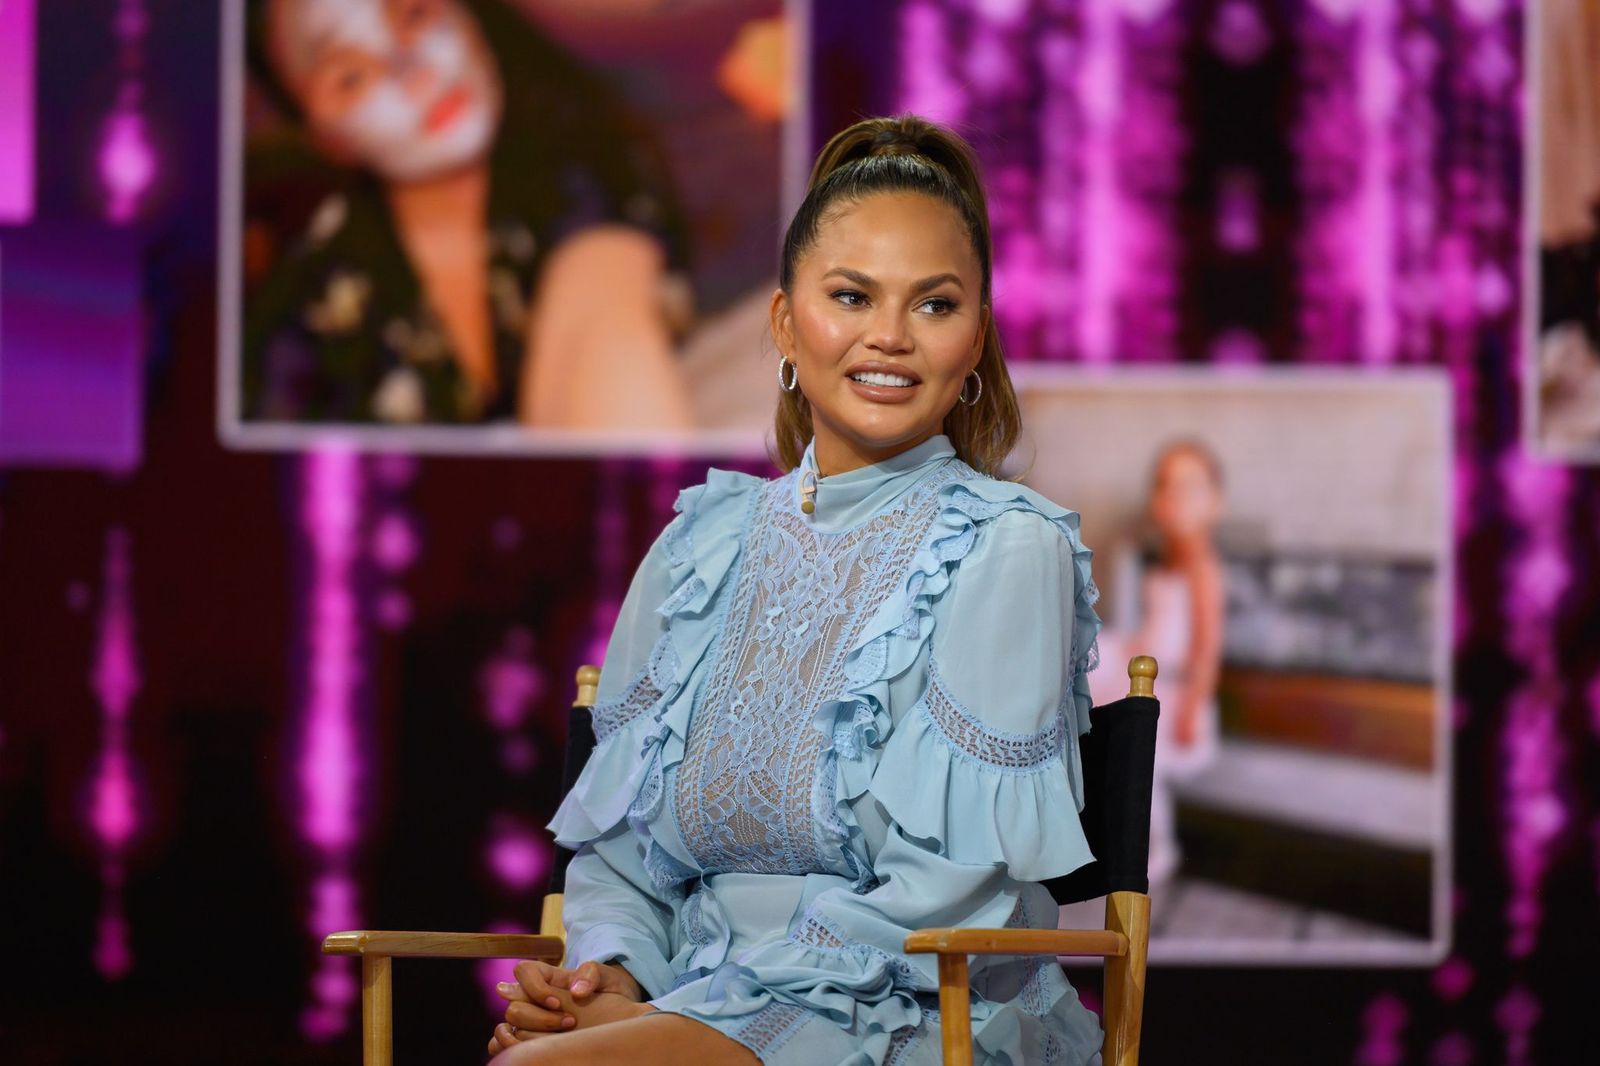 Chrissy Teigen on the set of the "Today" show on February 19, 2020 | Photo: Getty Images